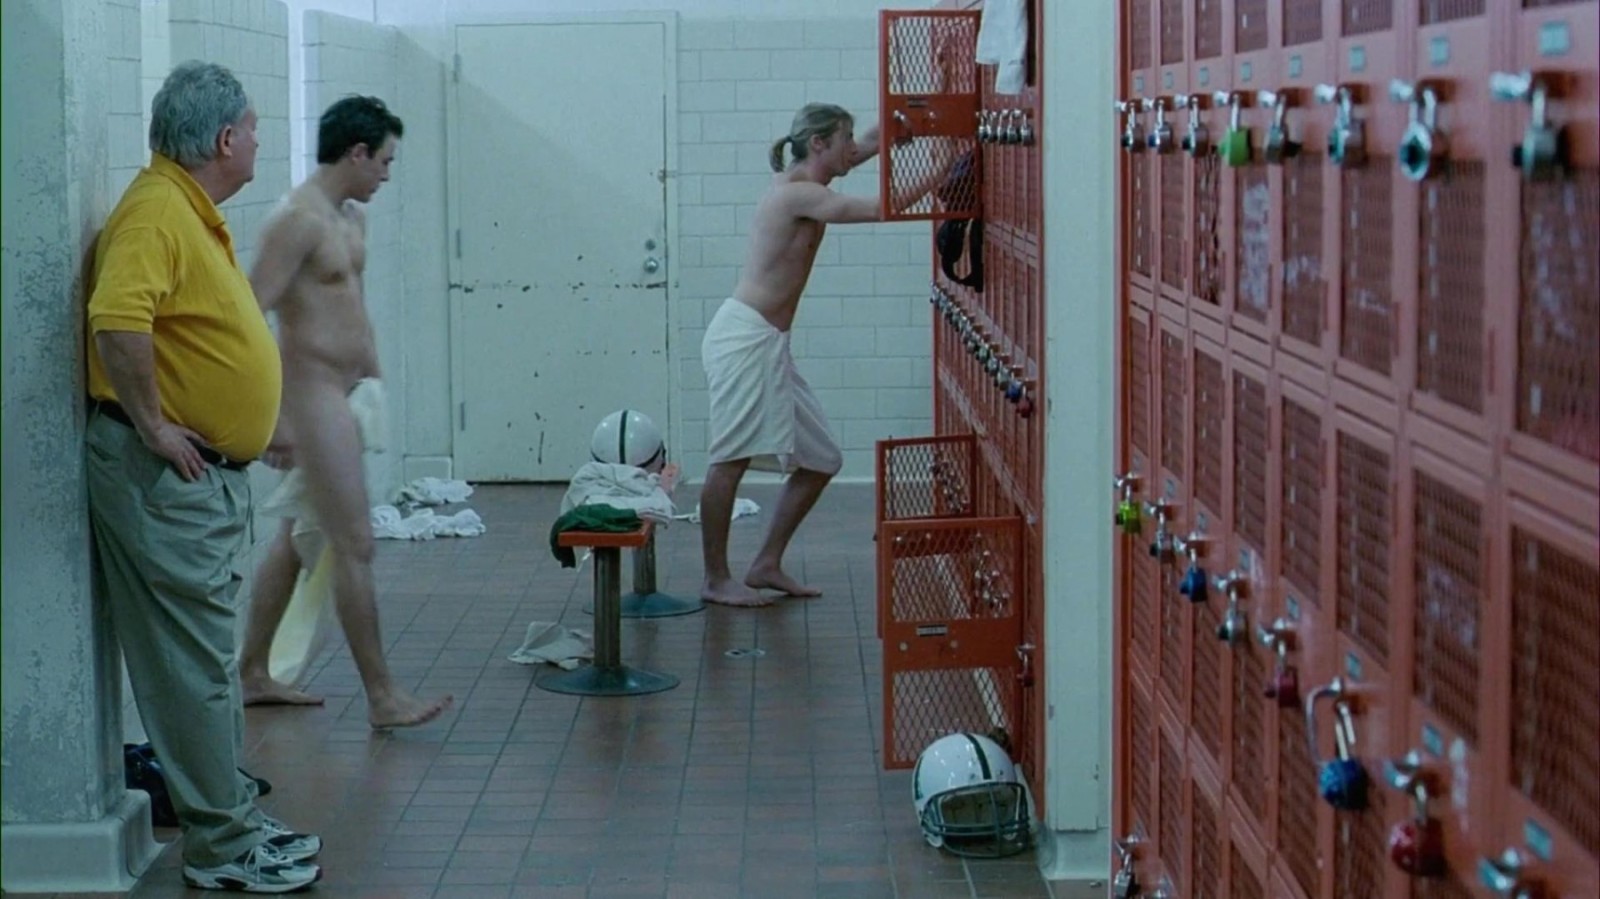 Heat in the shower: provocative nakedness in the locker room!